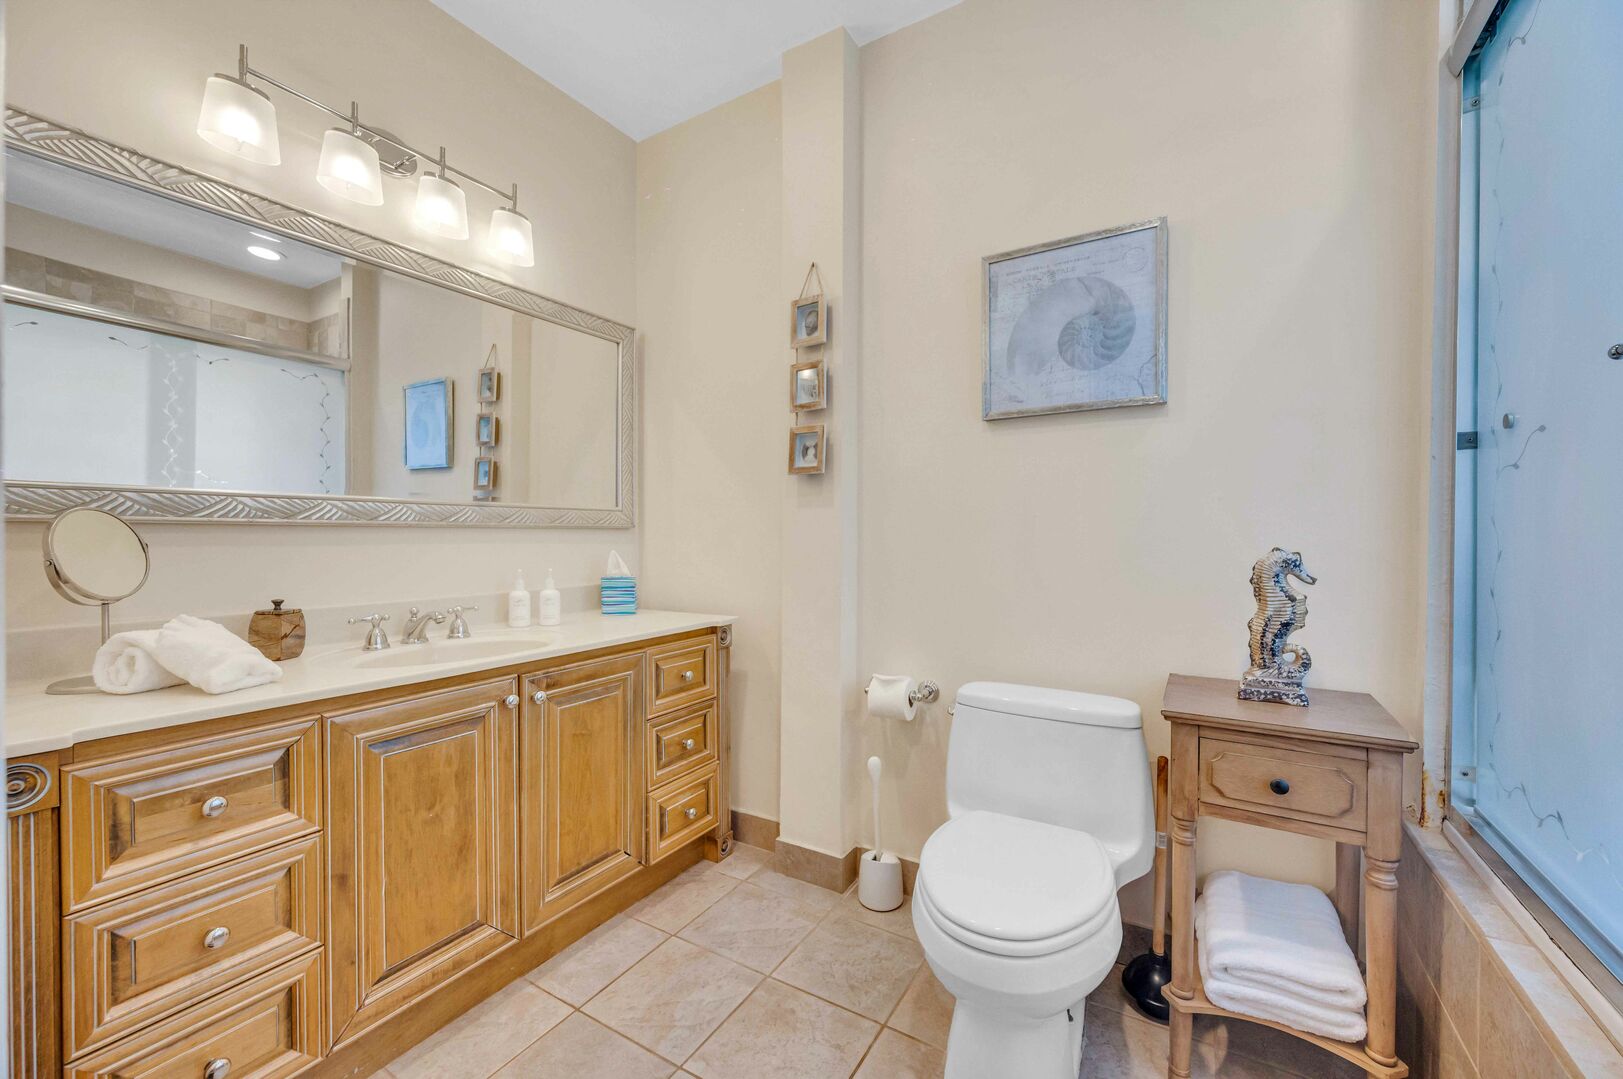 Primary bathroom with dual vanities and Tub/Shower combo.